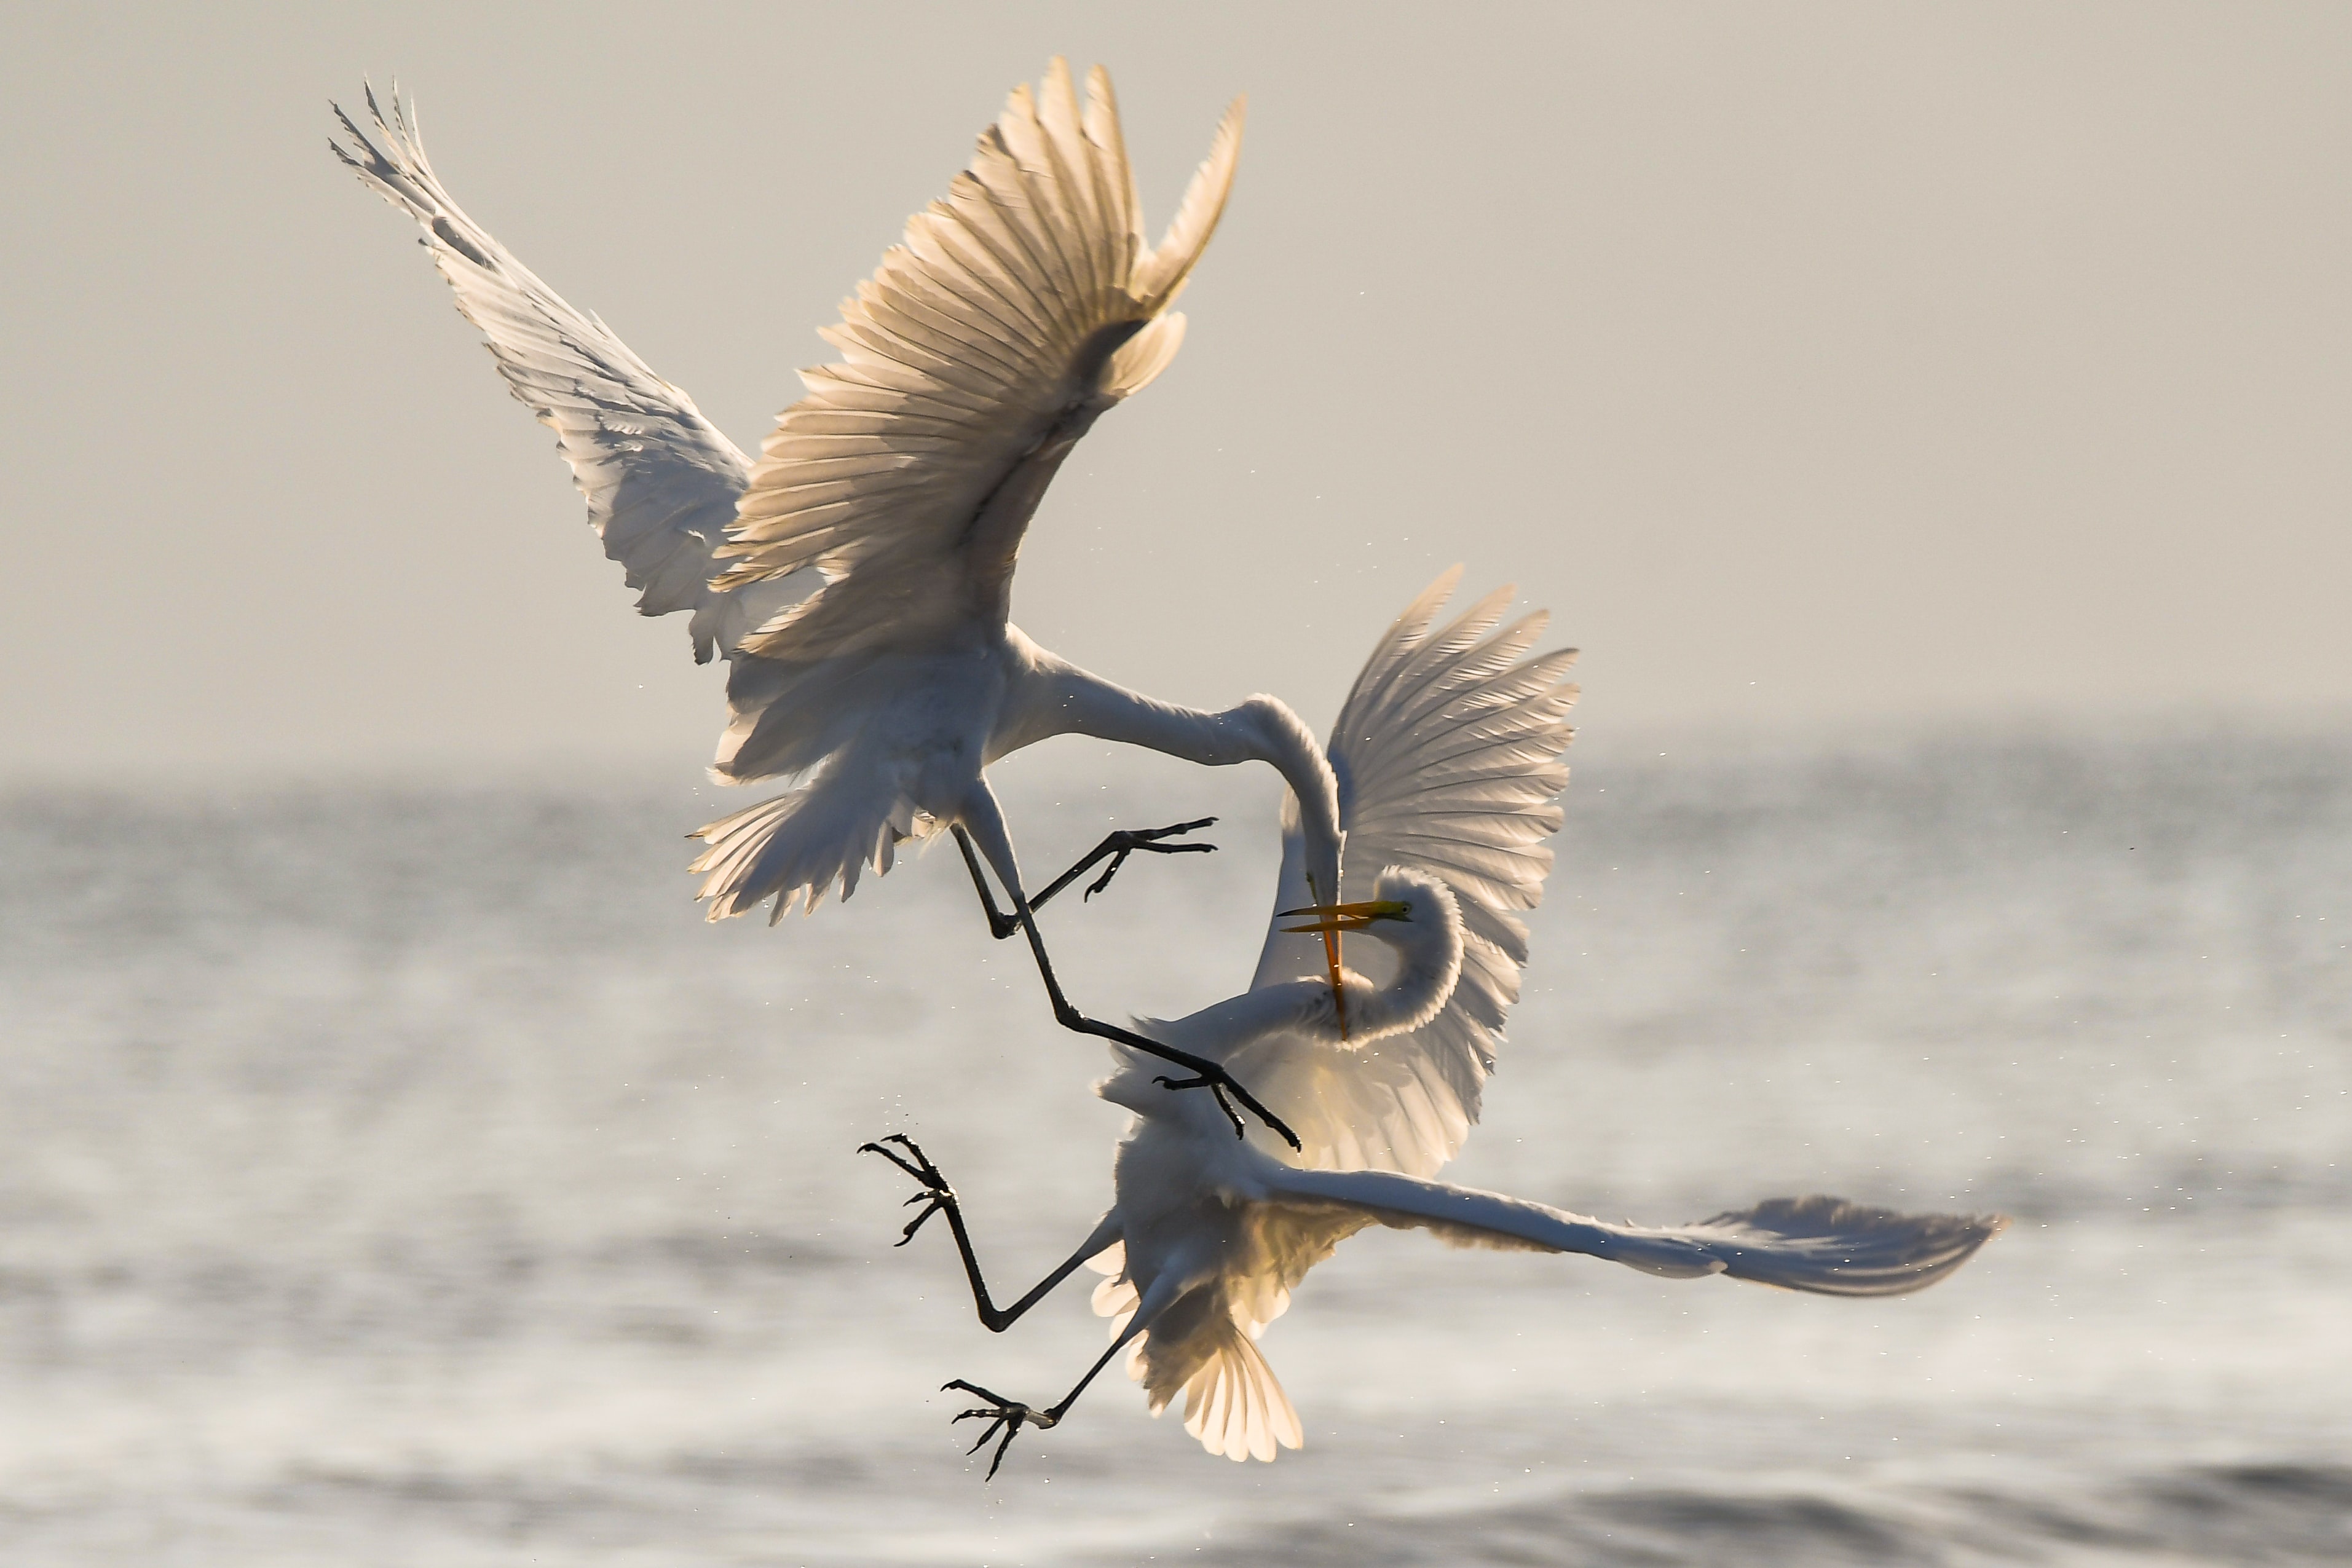  Two Great Egrets battle for territorial fishing rights